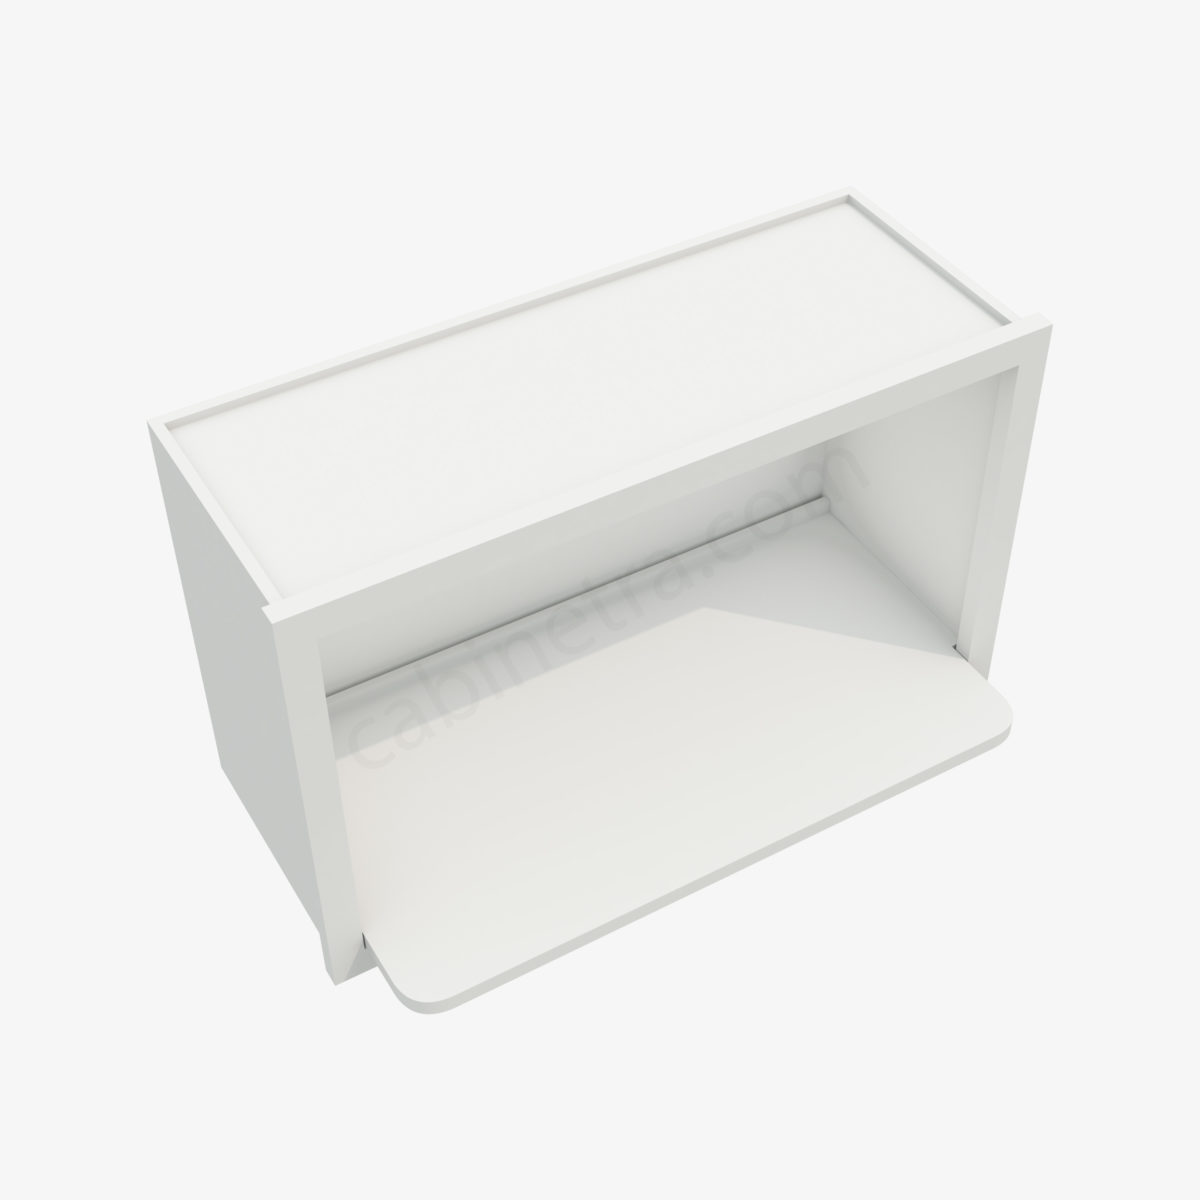 AW MWO3018PM 12 2 Forevermark Ice White Shaker Cabinetra scaled